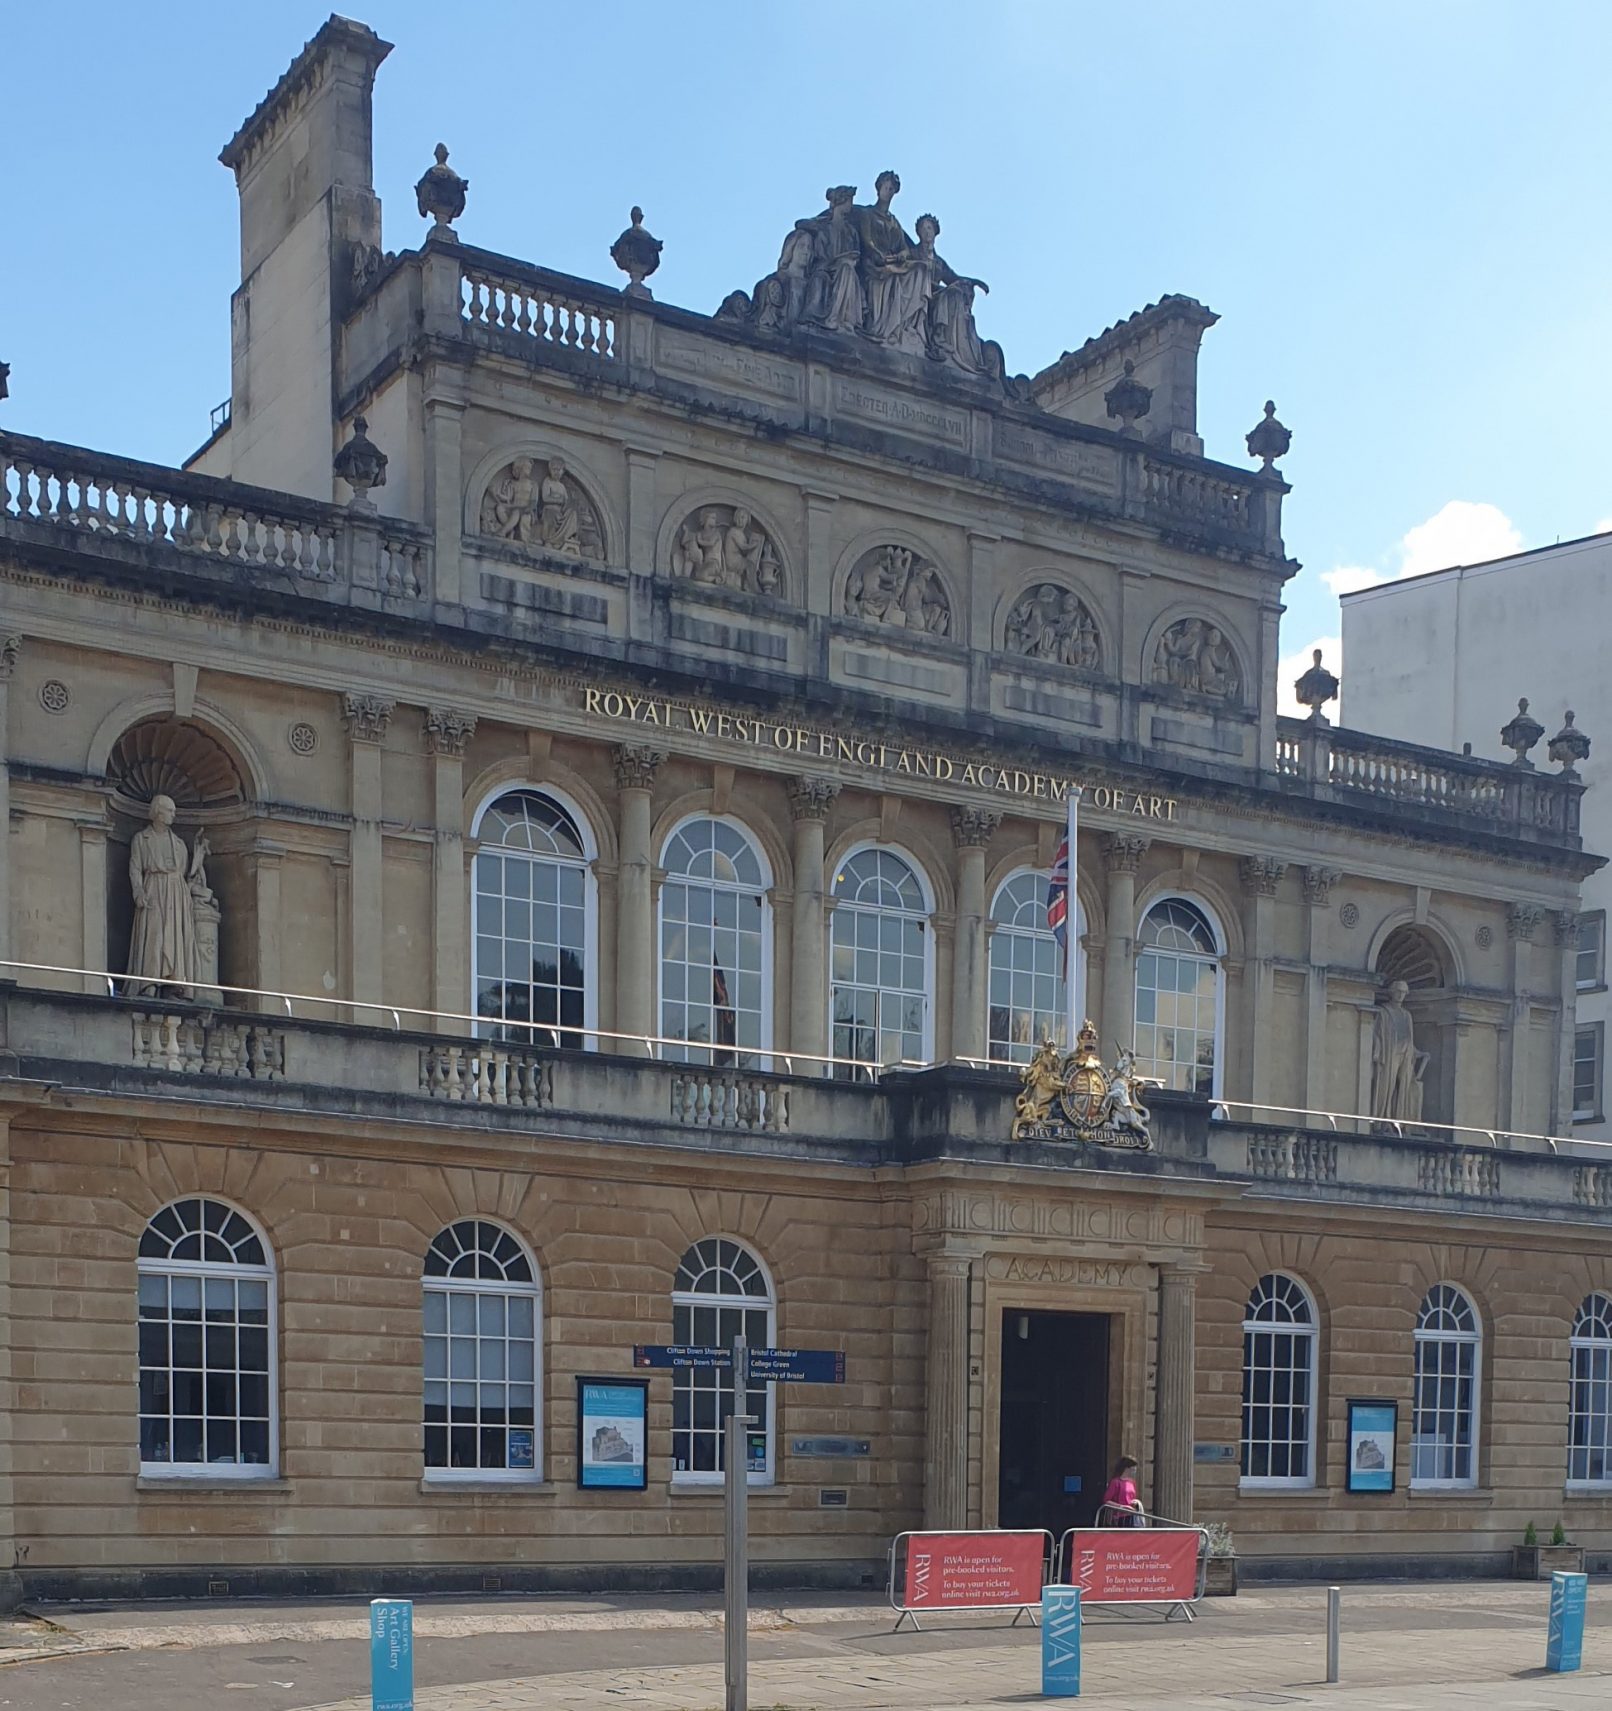 168th RWA Open at Royal West of England Academy of Art, Bristol